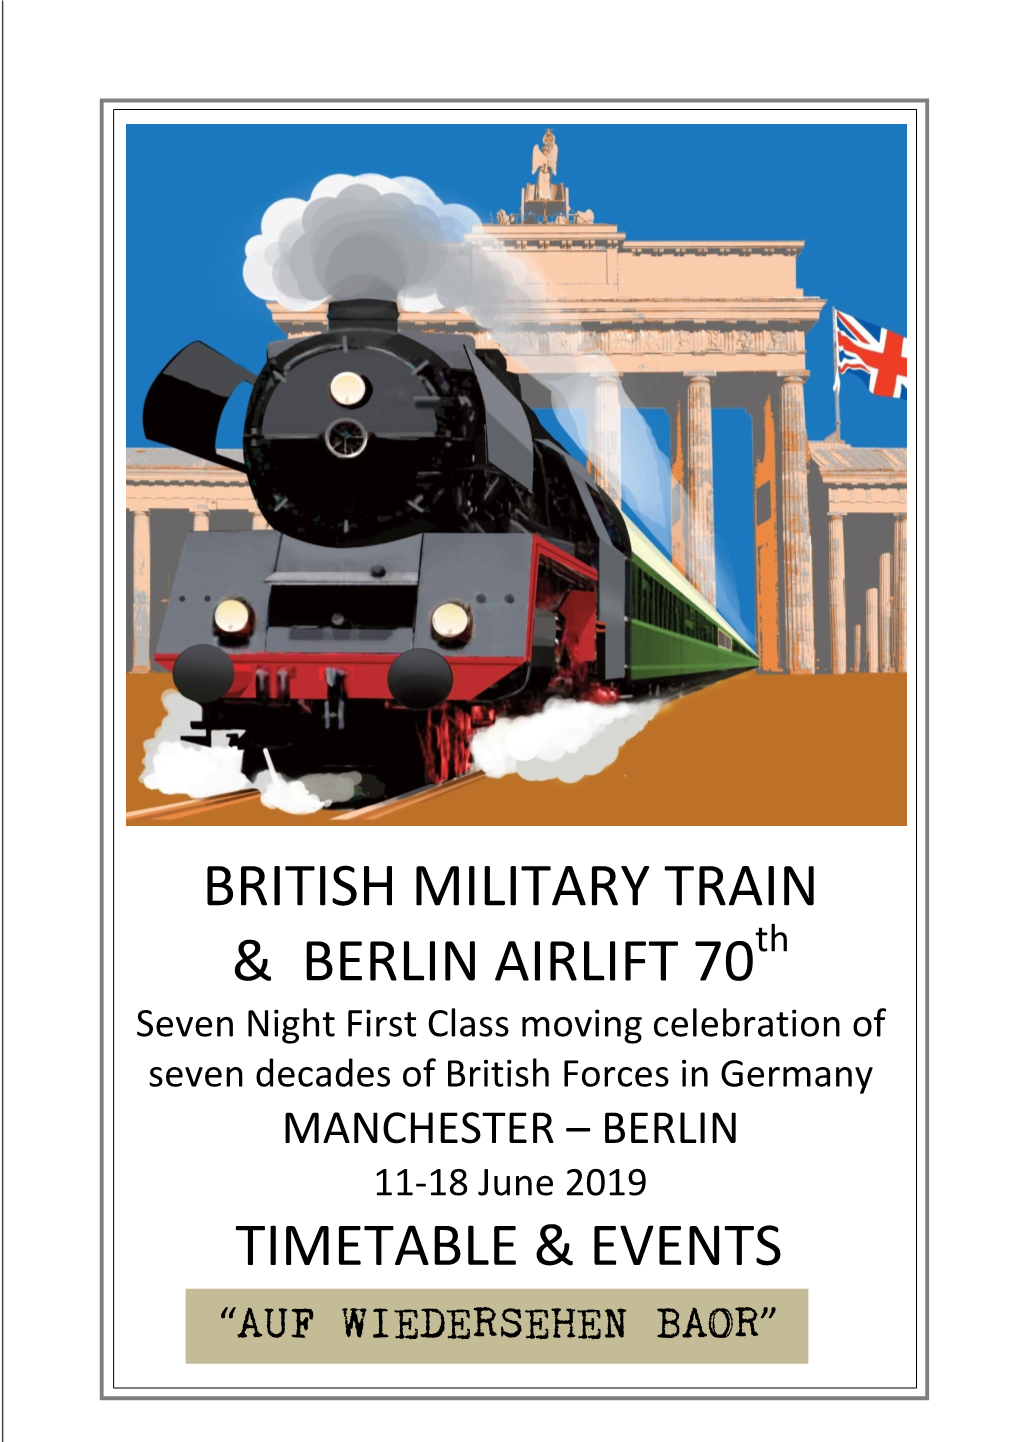 British Military Train & Berlin Airlift 70 Timetable & Events